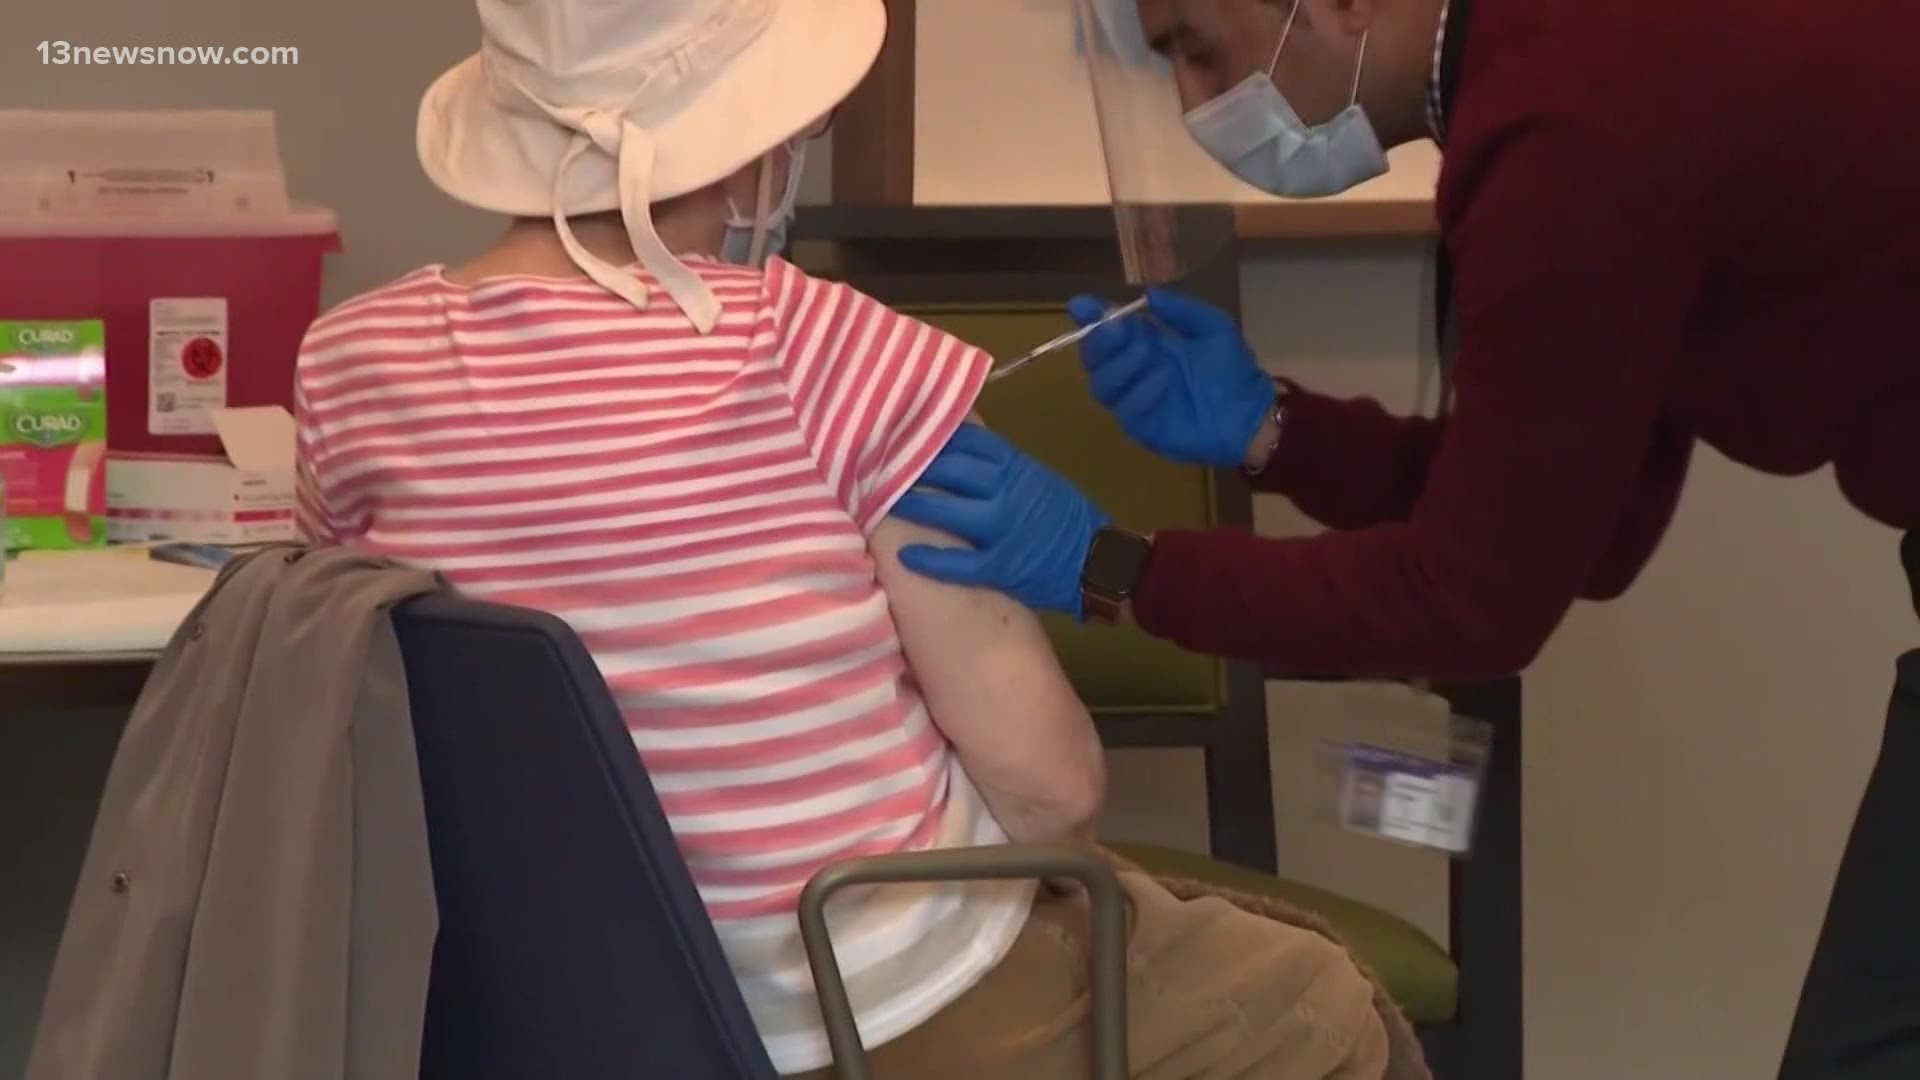 But it’s unclear if they can do it before those vaccines are fully licensed. Here's a look at what the experts say.